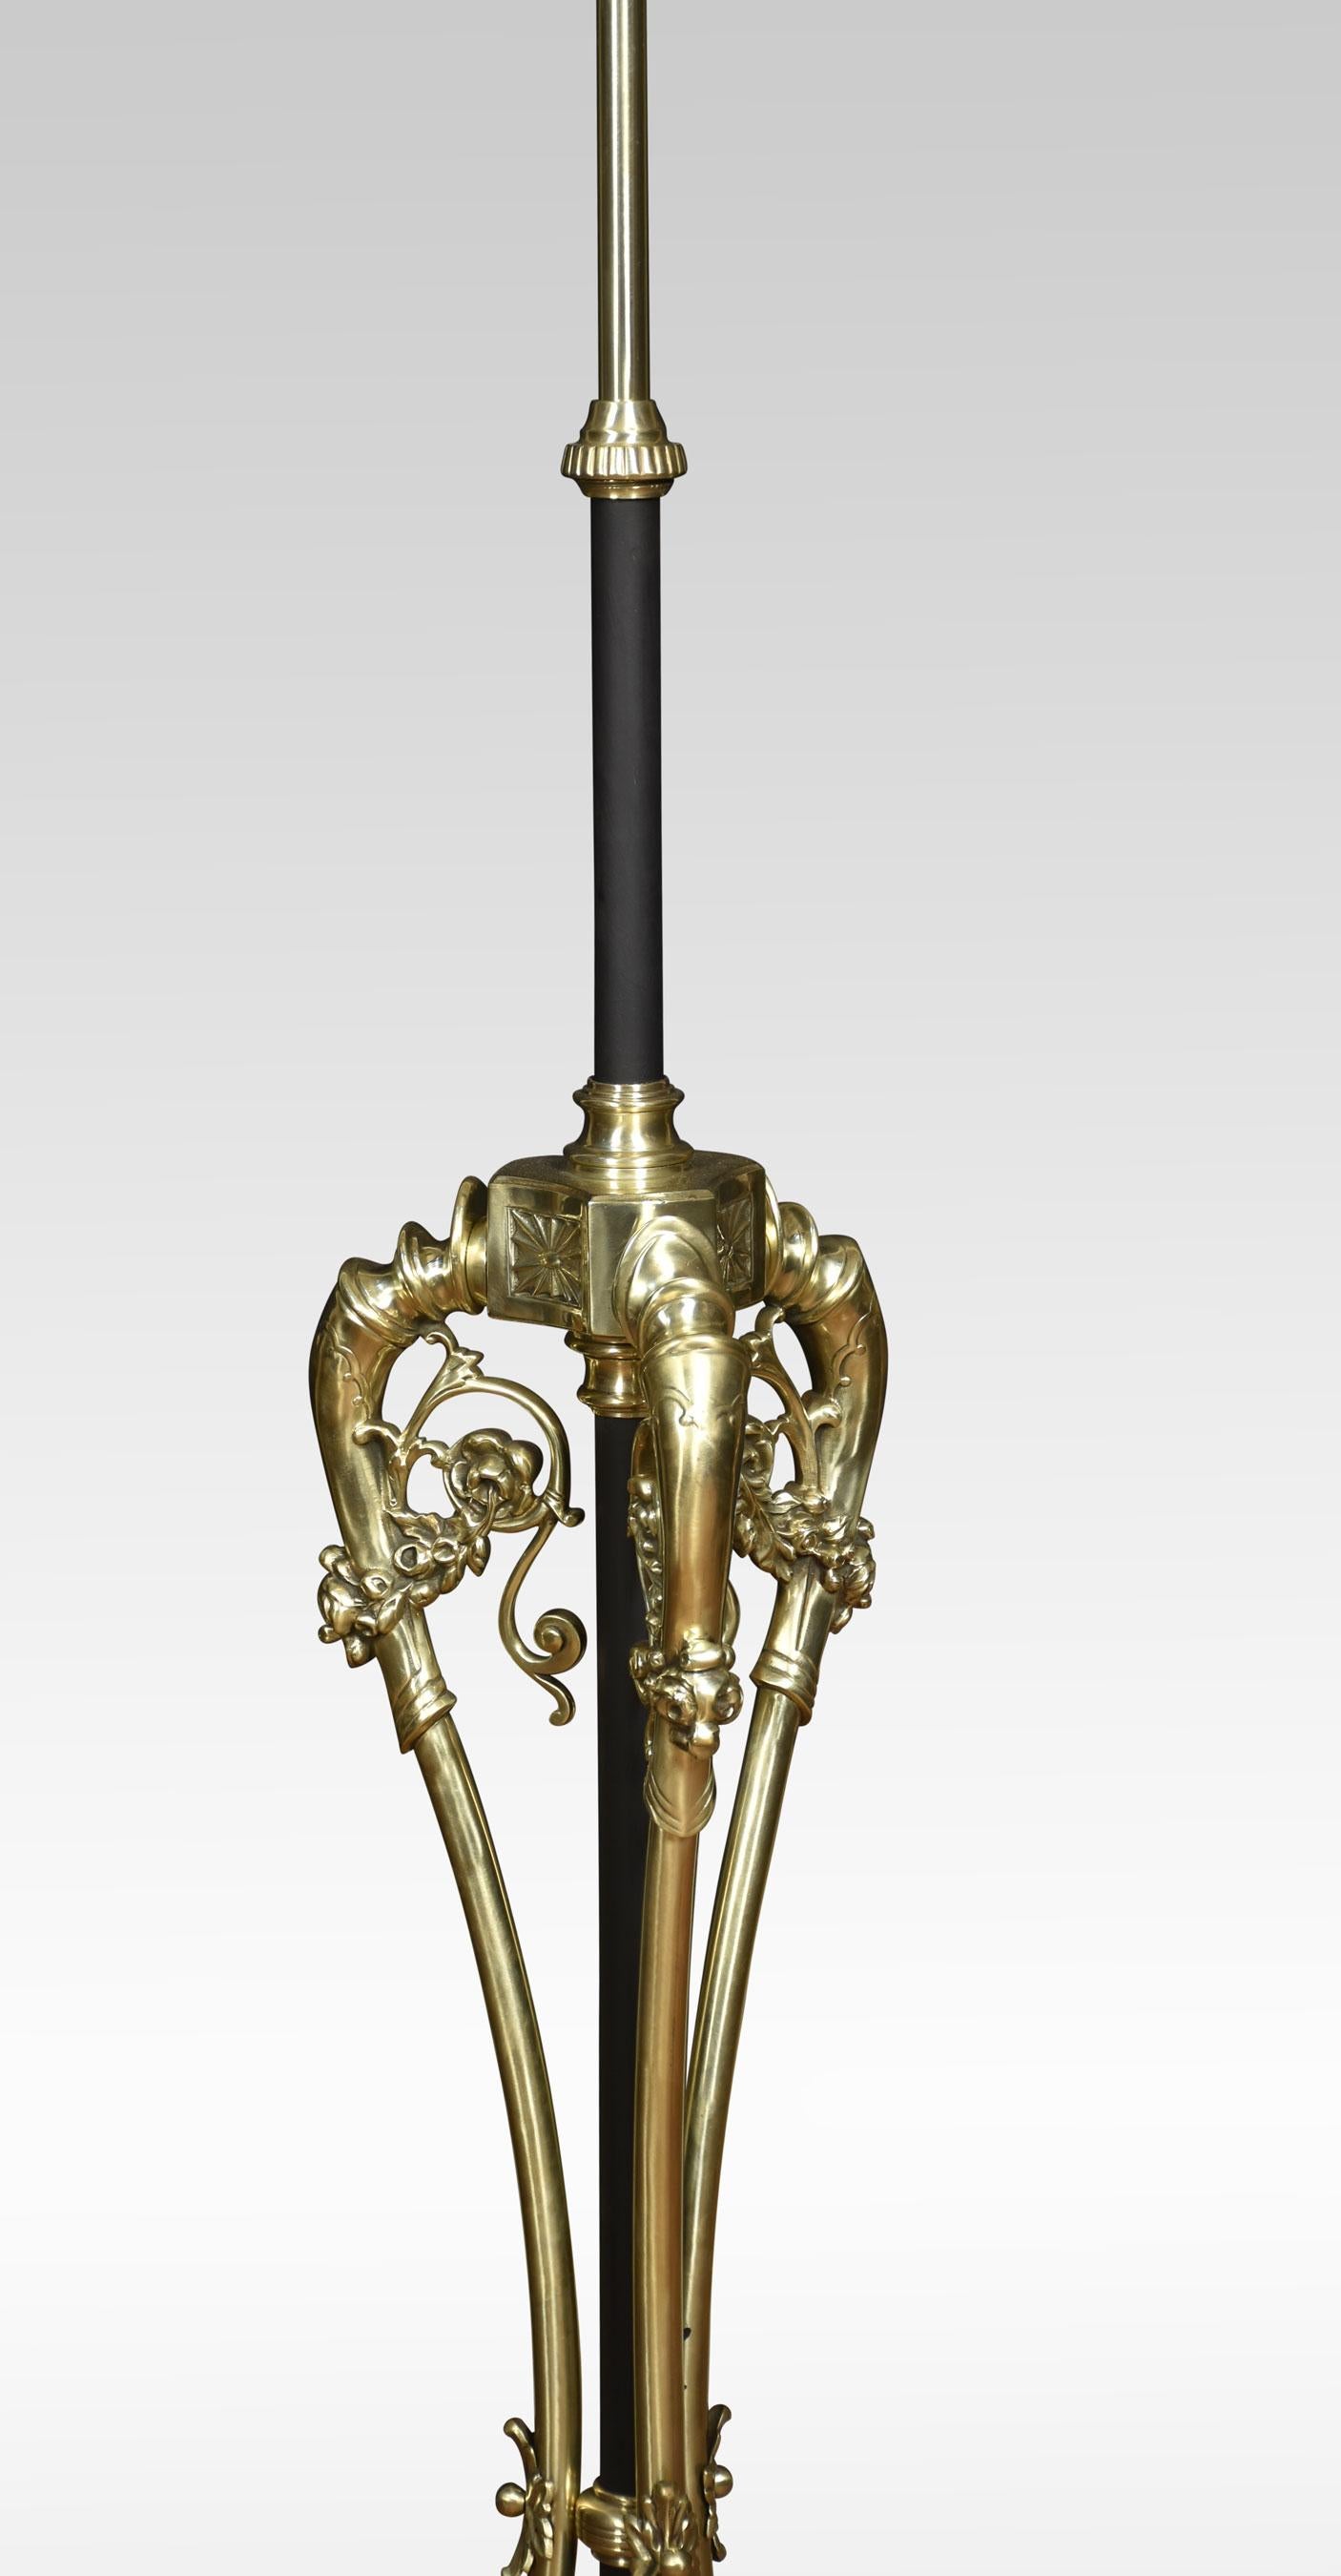 Brass standard lamp, with a circular adjustable reeded ebonized column. Raised up on shaped splayed base with scrolling feet. The lamp has been rewired and tested.
Dimensions
Height 50 Inches adjustable to 80 Inches
Width 18 Inches
Depth 18